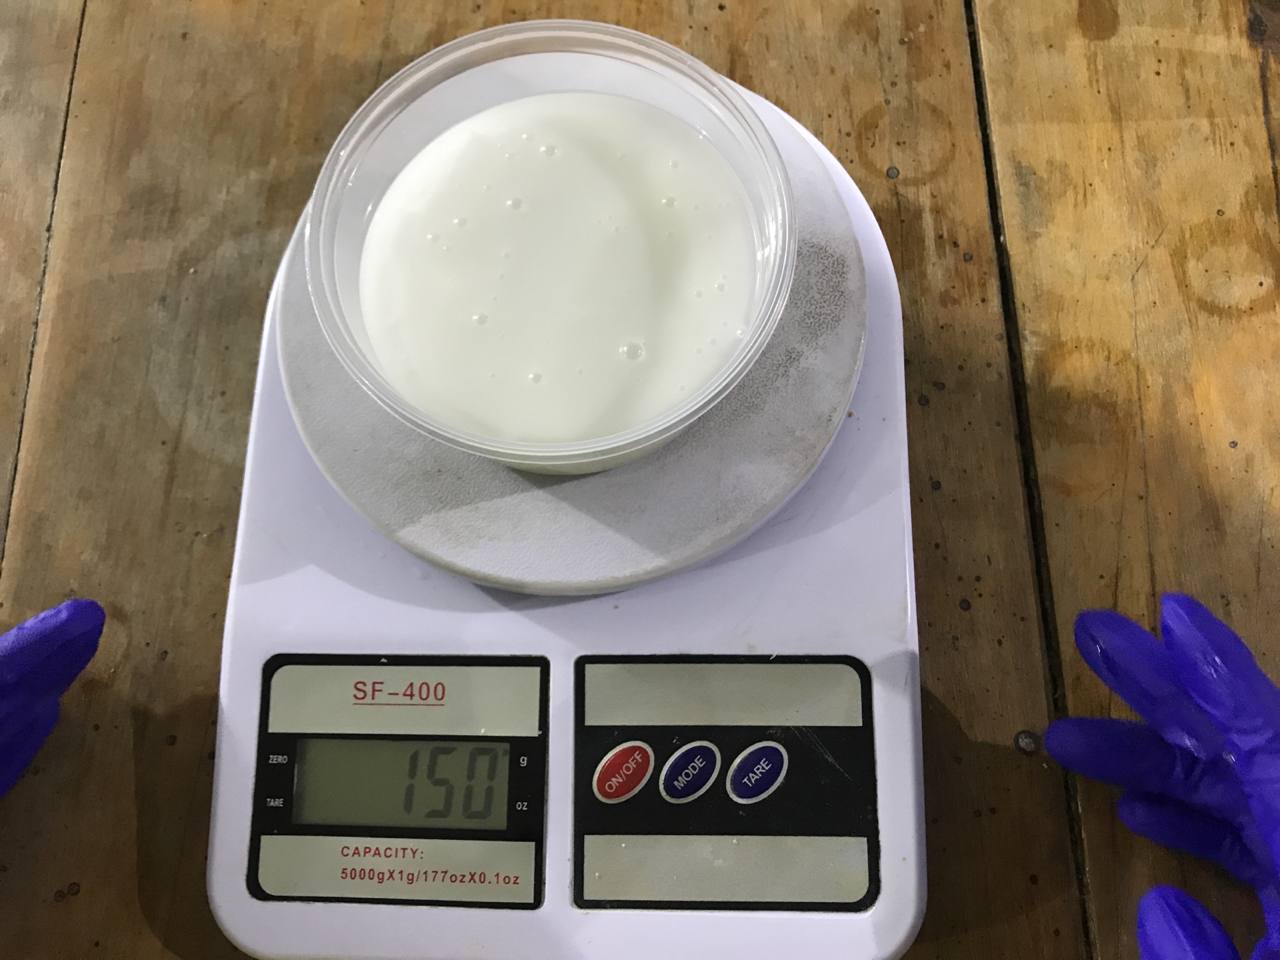 150 grams of Silicone